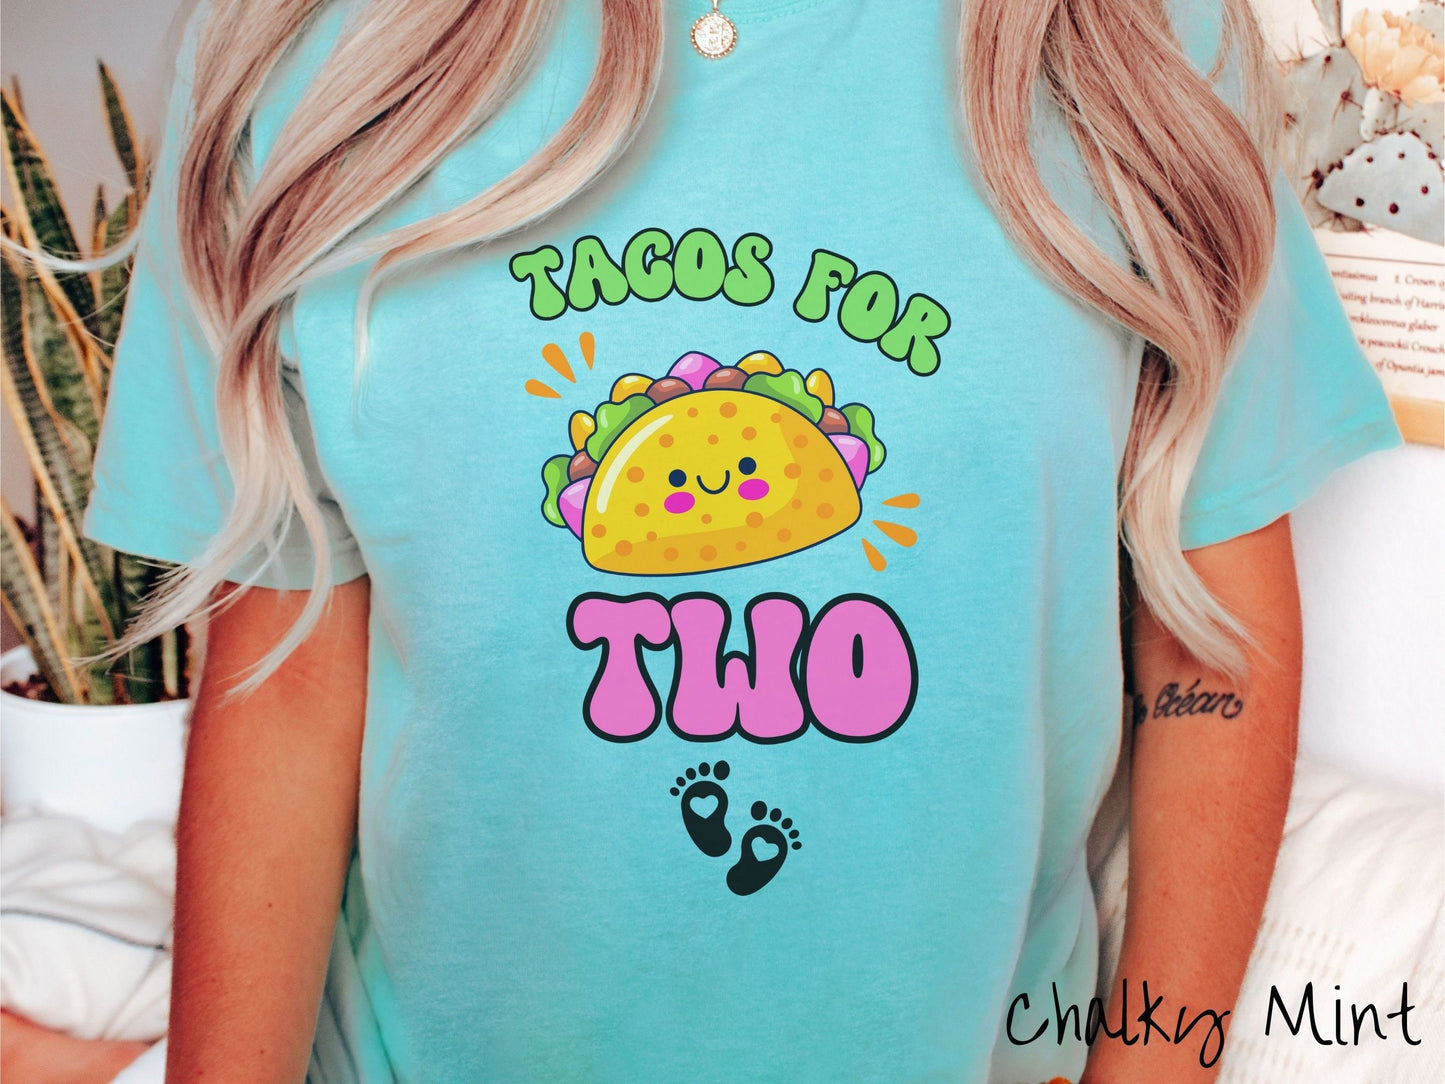 A woman wearing a cute, vintage chalky mint colored Comfort Colors t-shirt with text Tacos for Two in green and pink font. In between the font is a smiling taco with colorful fillings and below are two baby footprints with hearts inside.